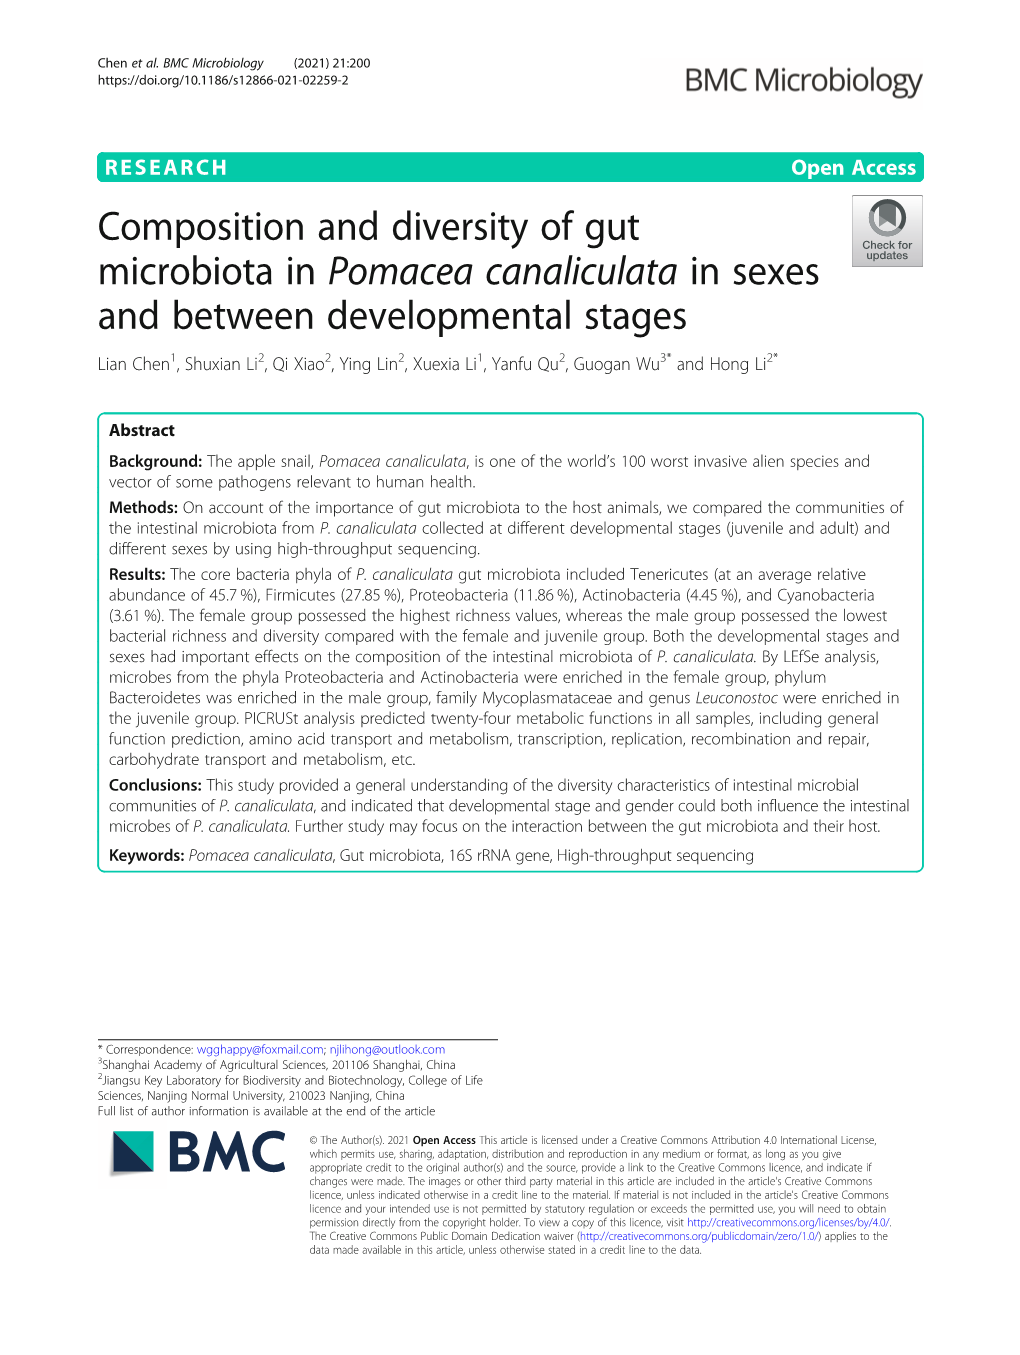 Composition and Diversity of Gut Microbiota in Pomacea Canaliculata in Sexes and Between Developmental Stages